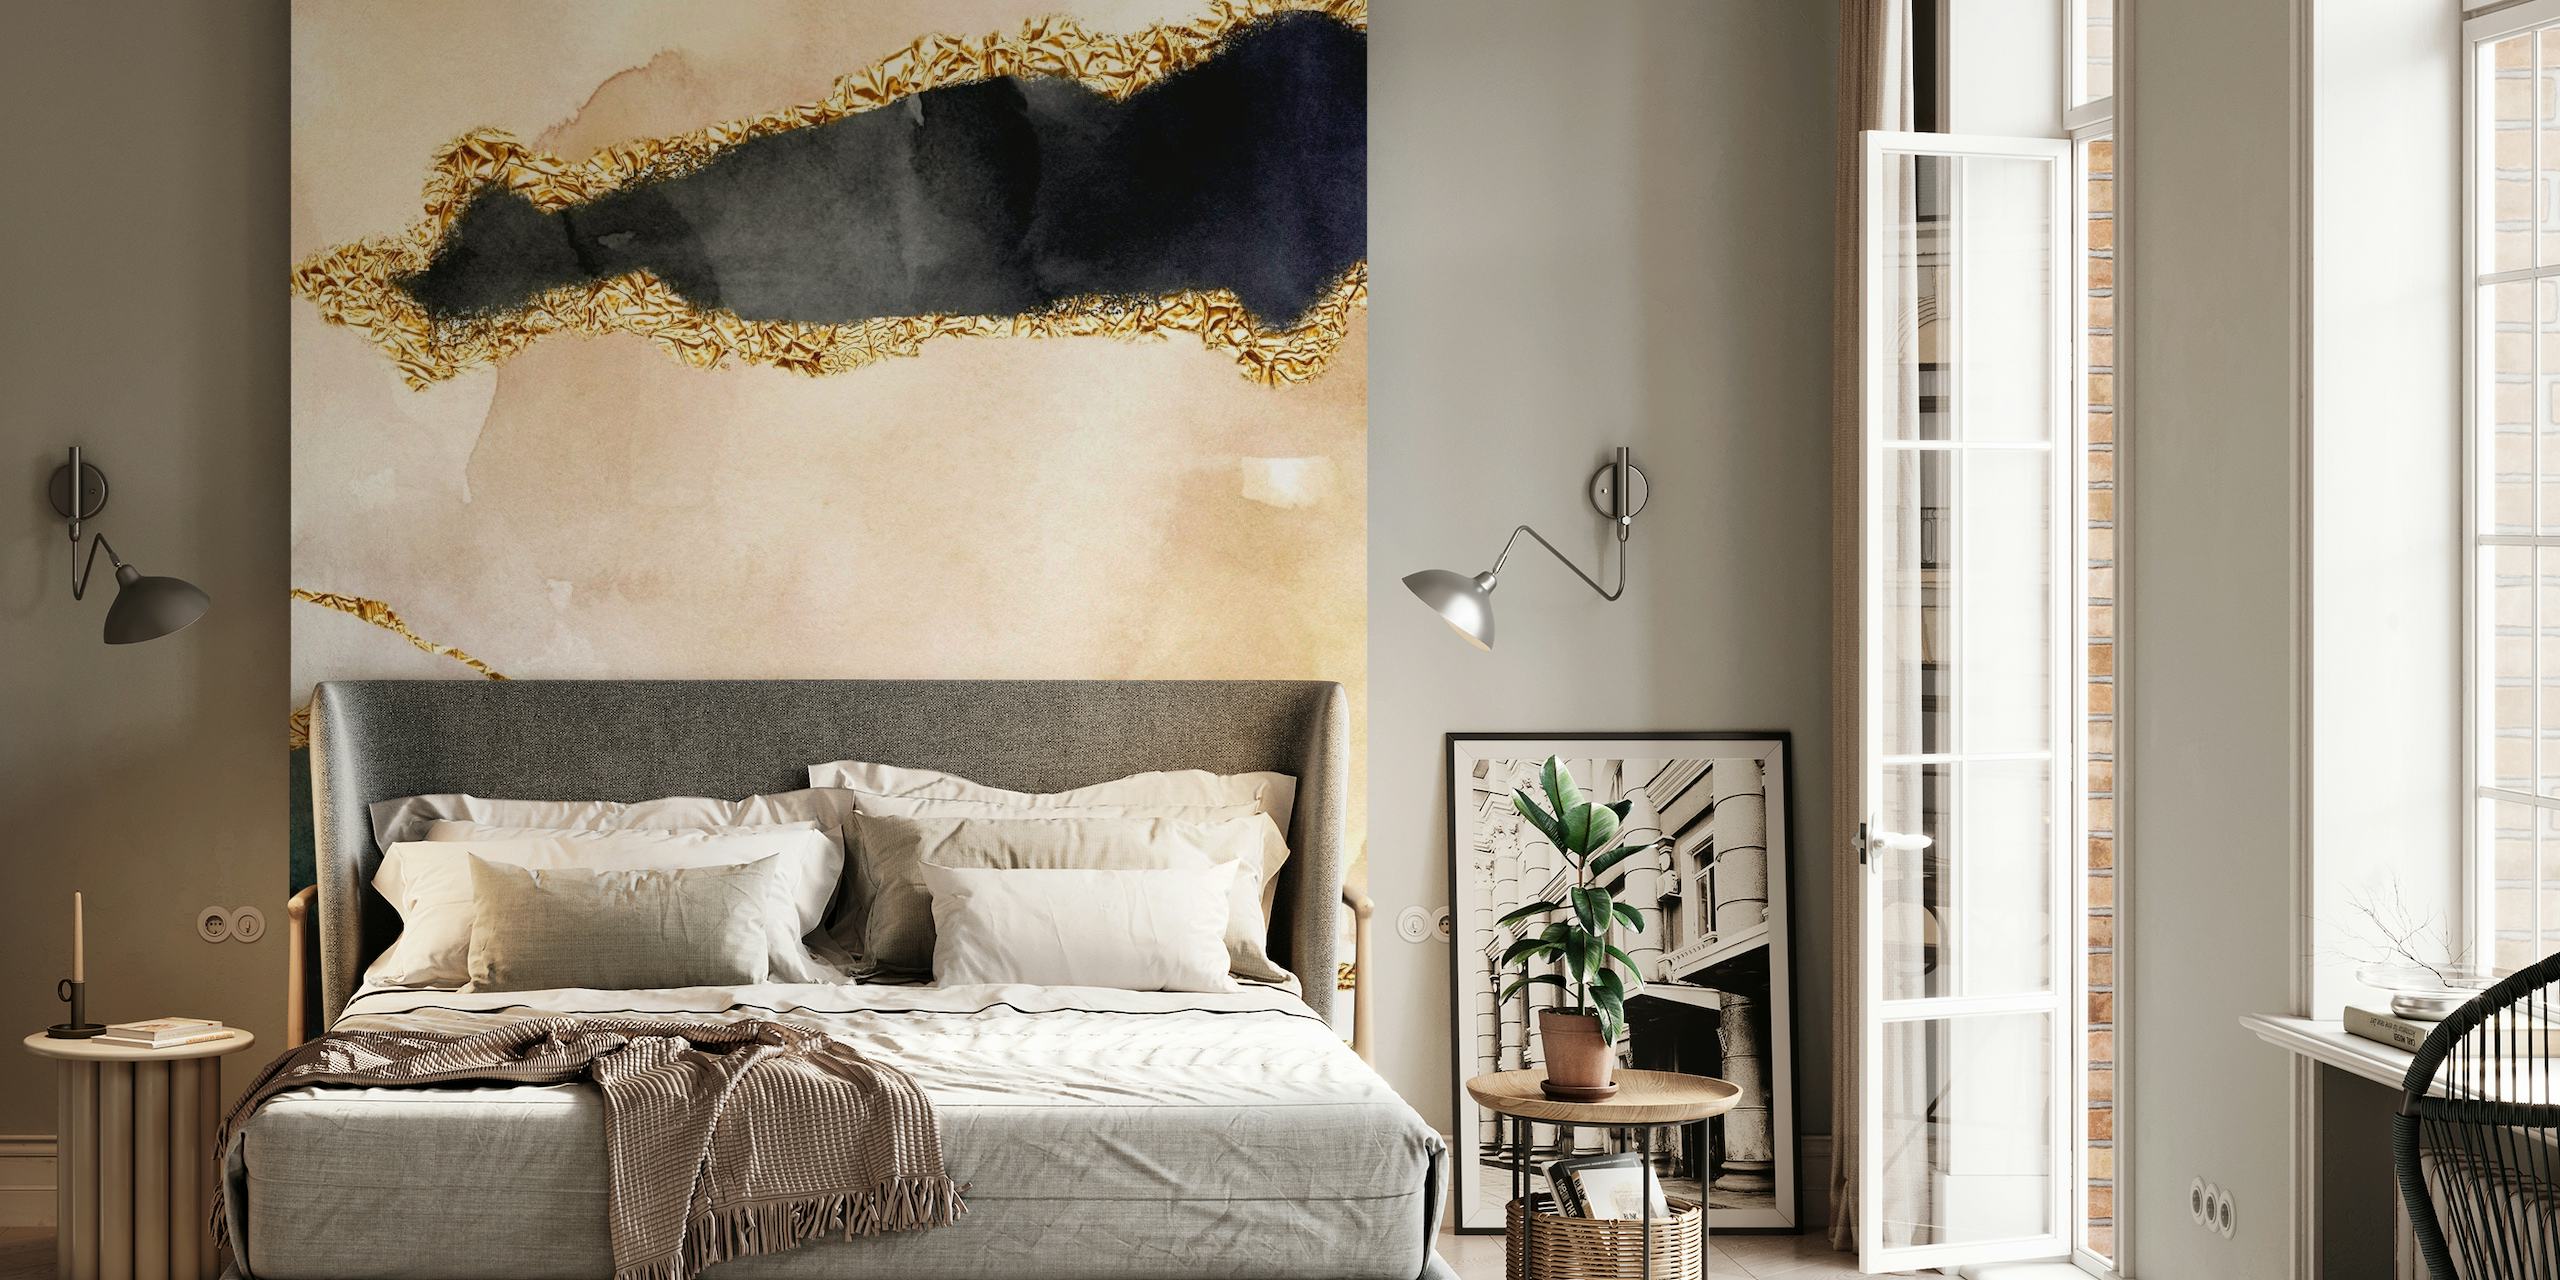 Abstract landscape wall mural with navy, gold, and cream watercolor textures